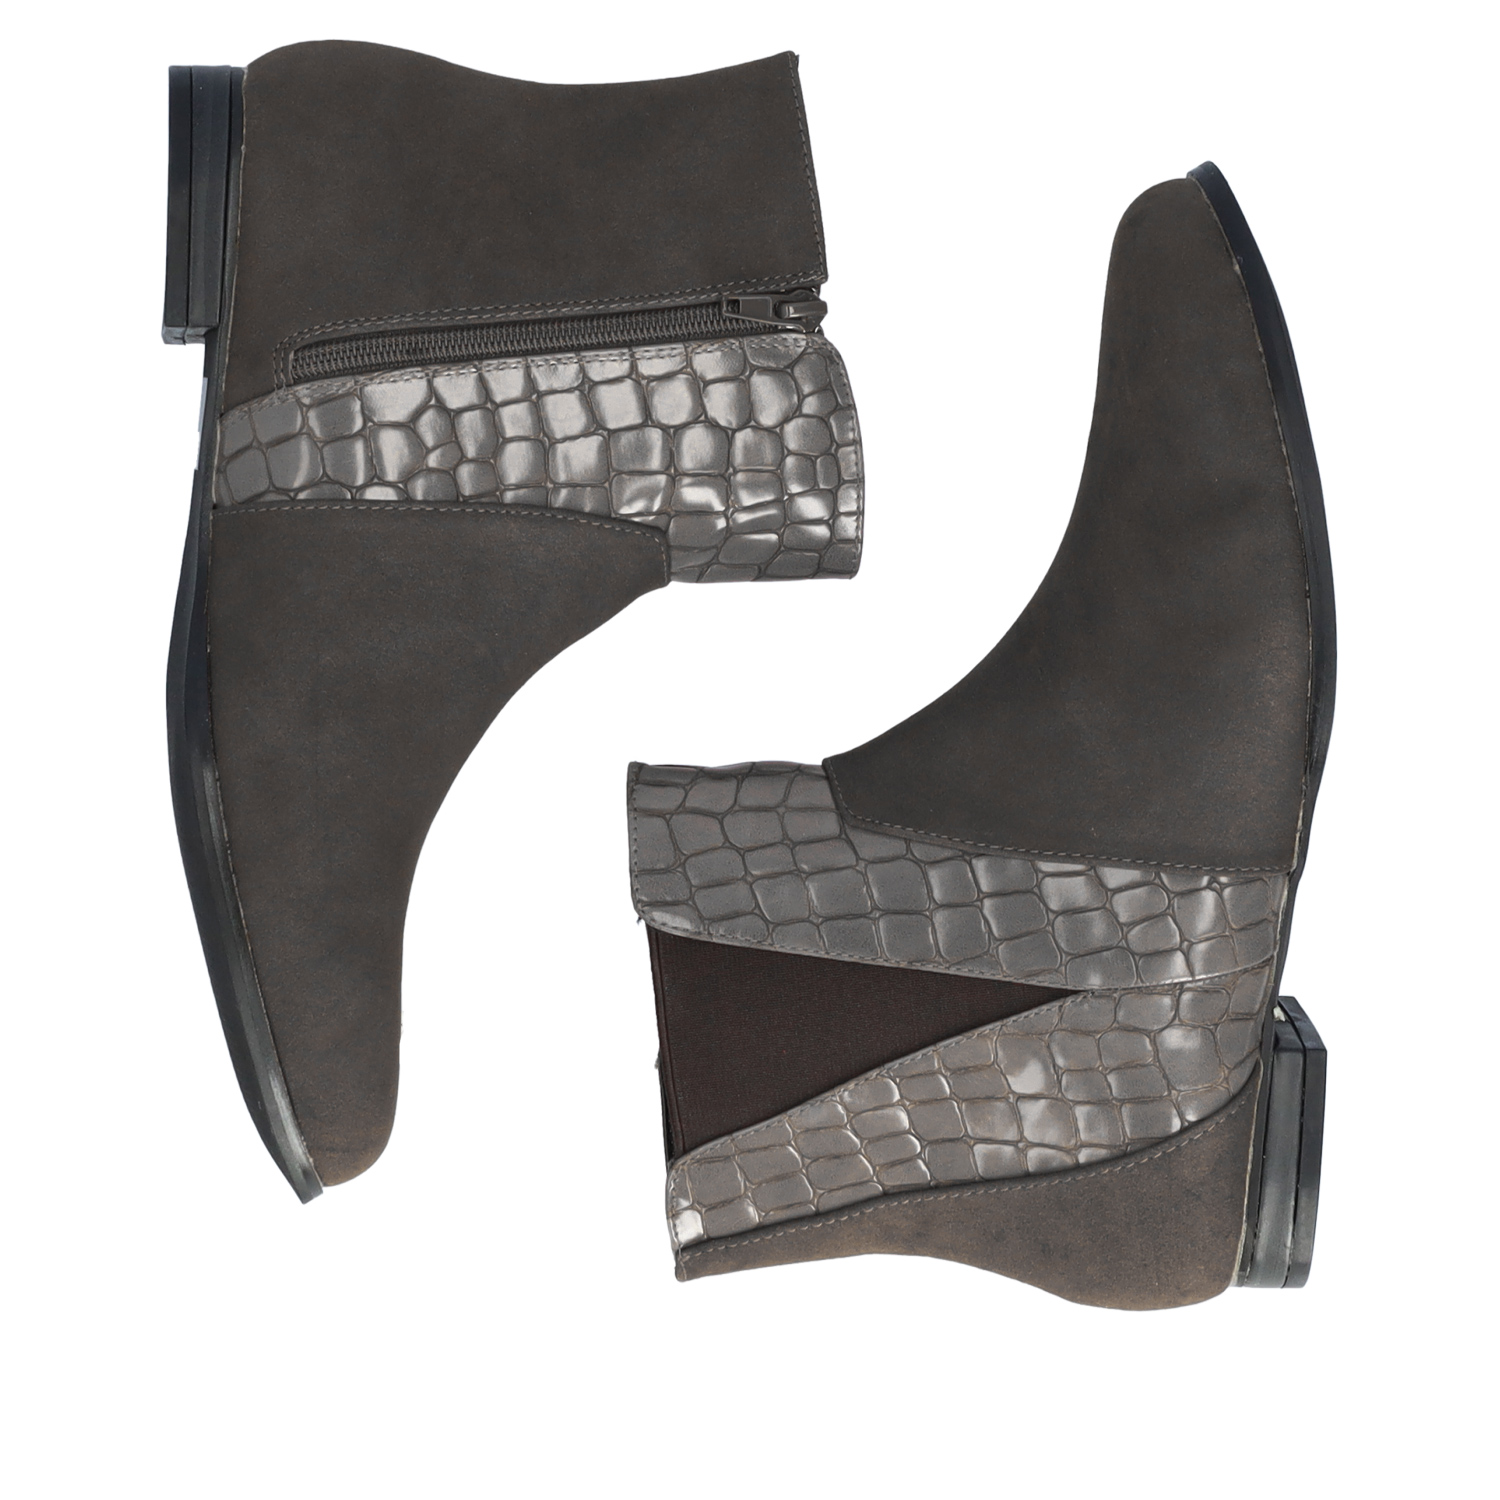 High-top booties in grey croc and faux suede 